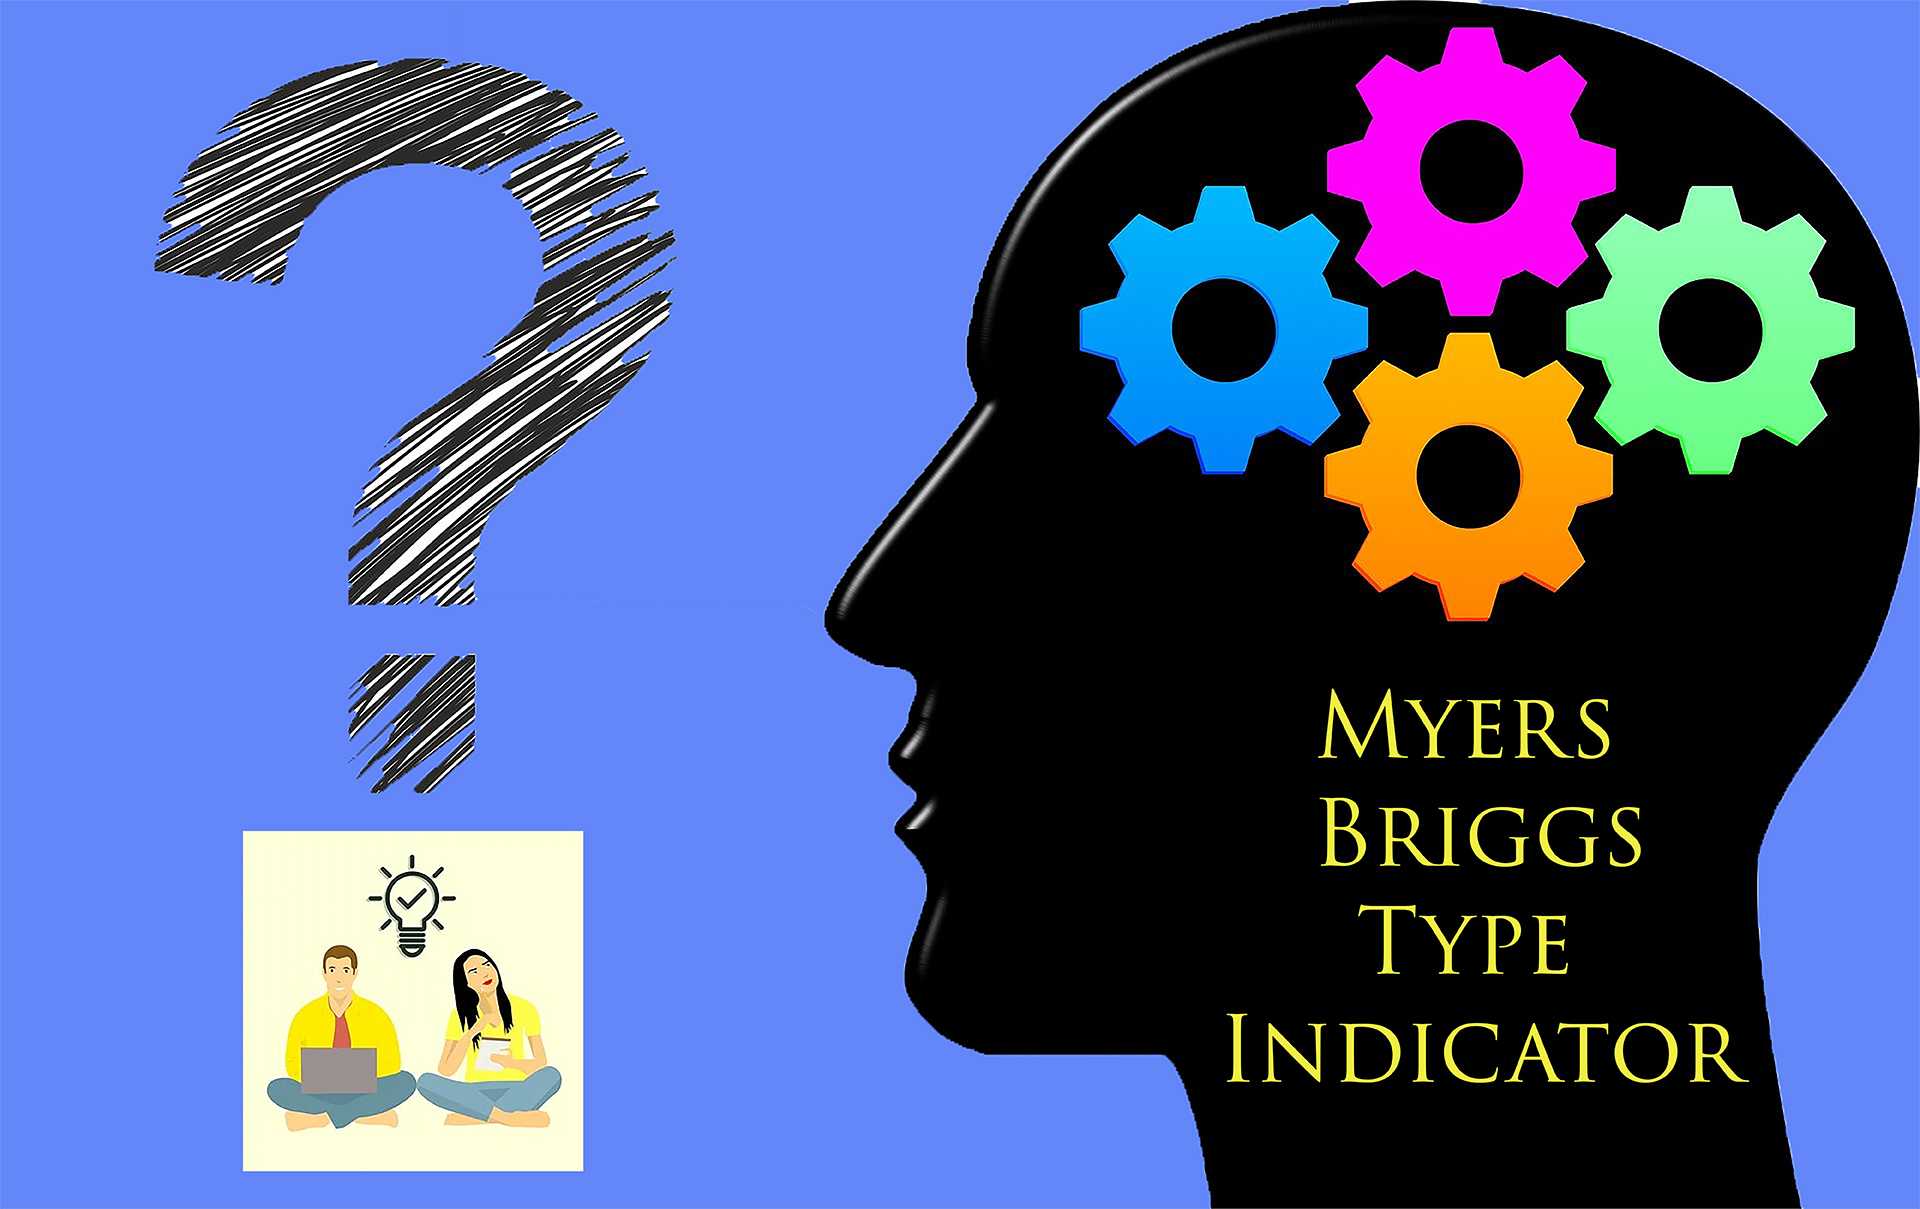 Knowing your personality type can benefit your business and life